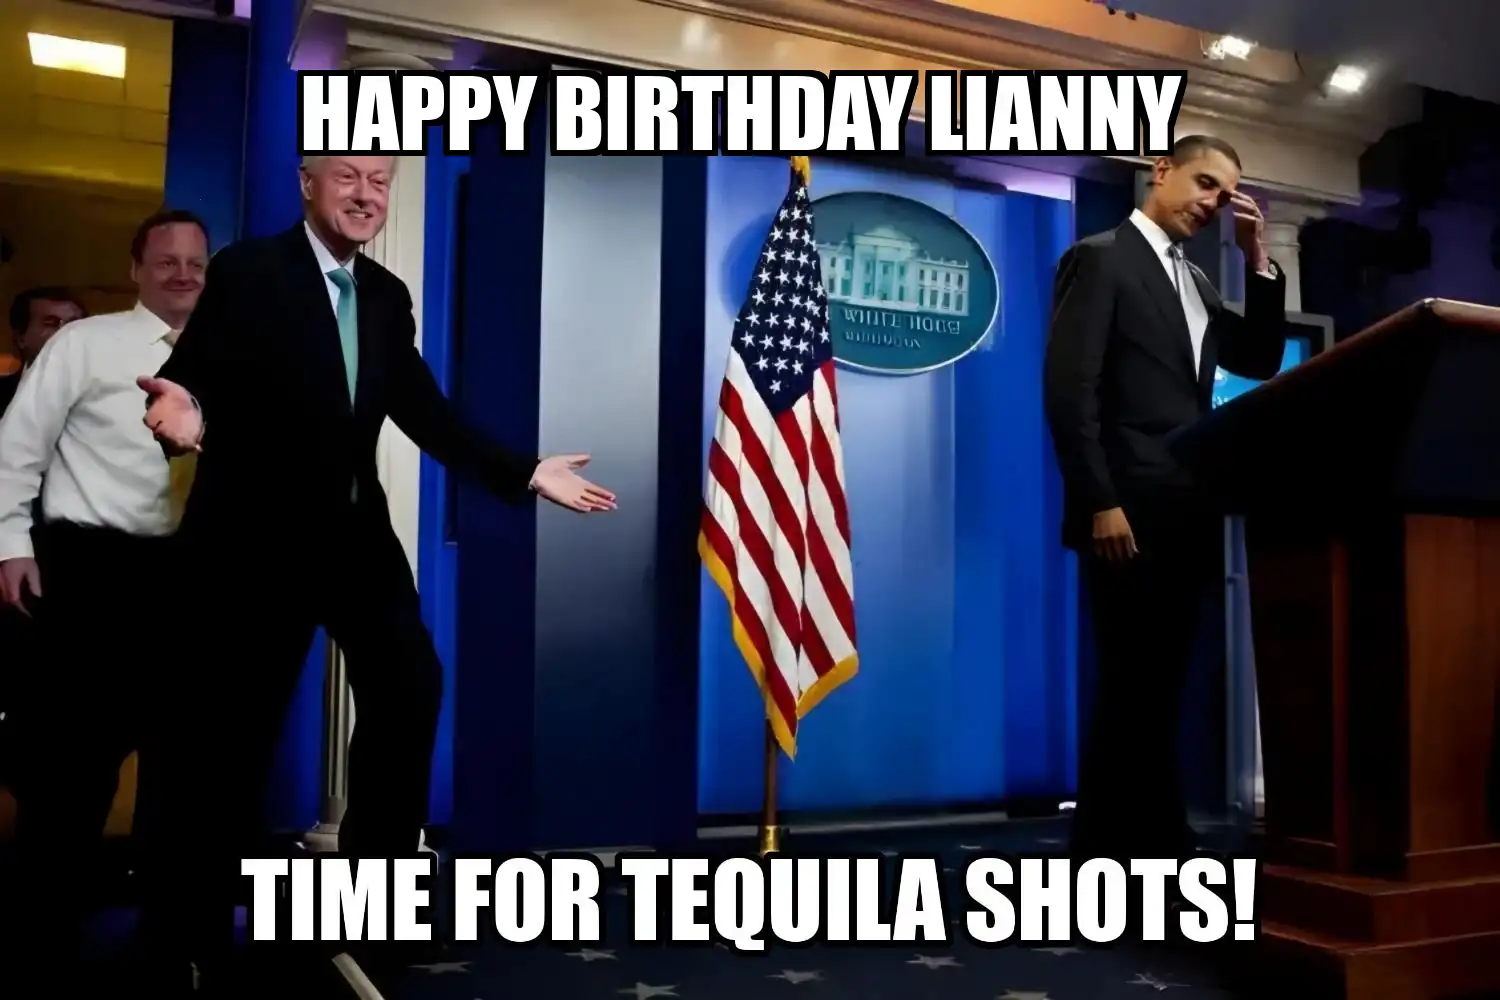 Happy Birthday Lianny Time For Tequila Shots Memes